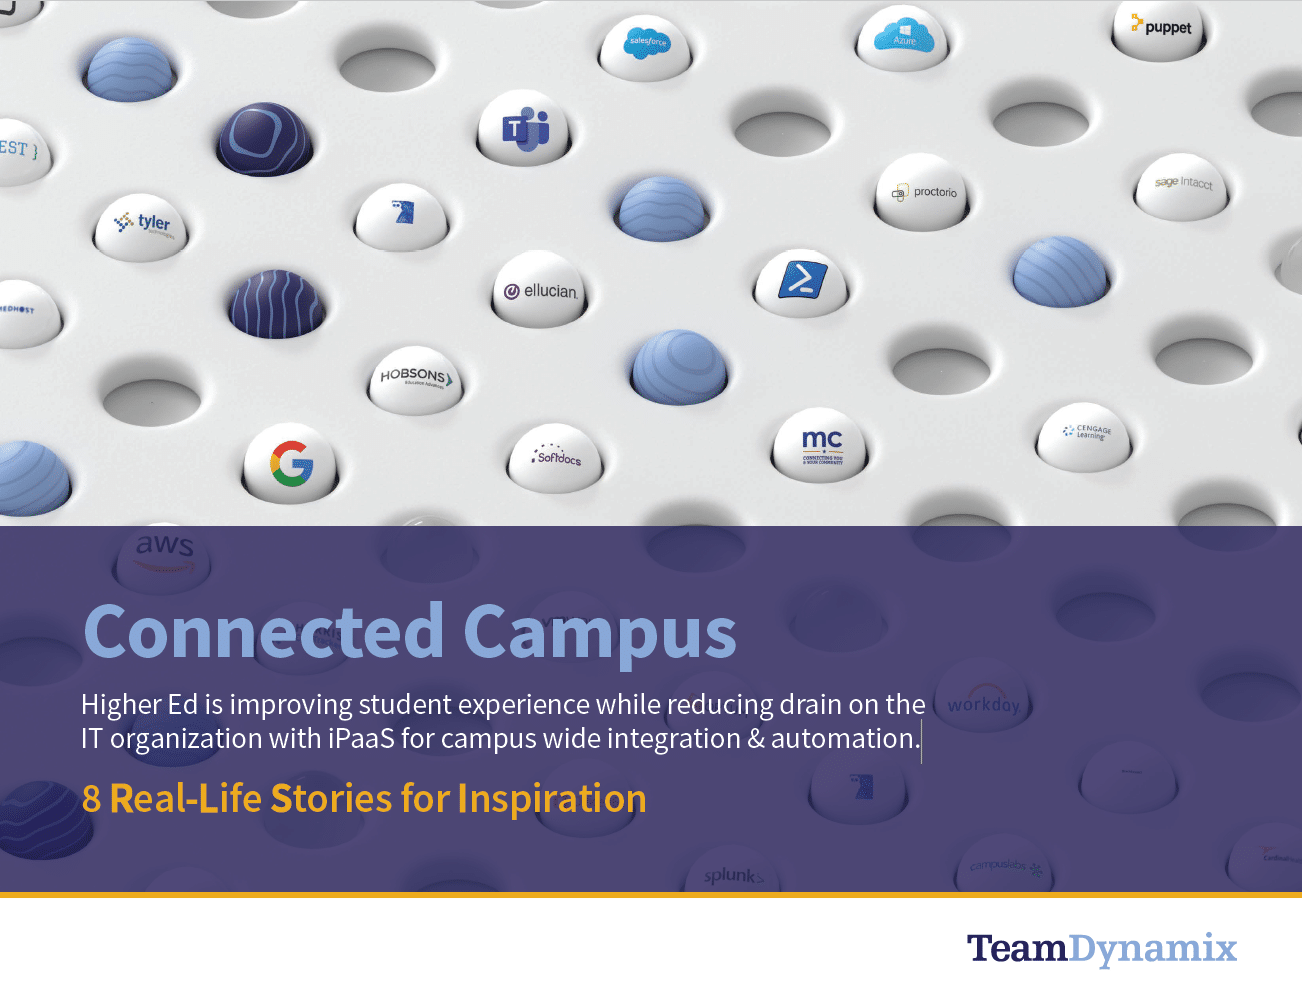 Connected Campus: Improving the Student Experience with iPaaS